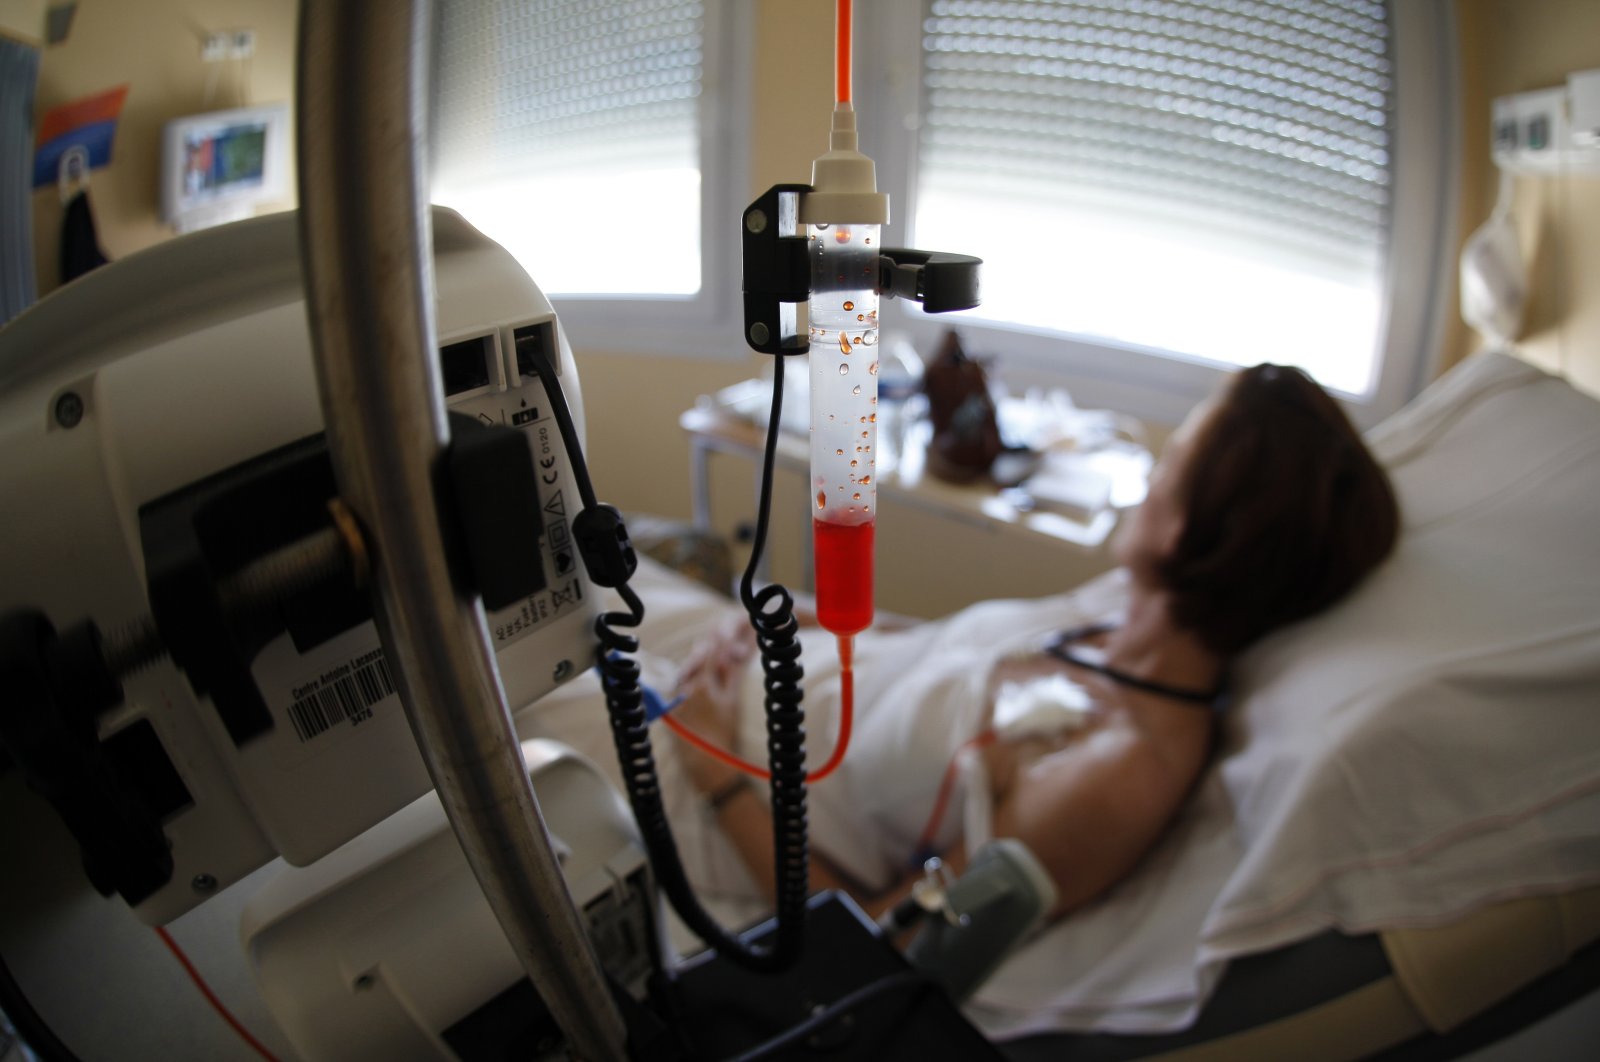 A patient receives chemotherapy treatment for breast cancer at the Antoine-Lacassagne Cancer Center in Nice, France, July 26, 2012. (Reuters Photo)